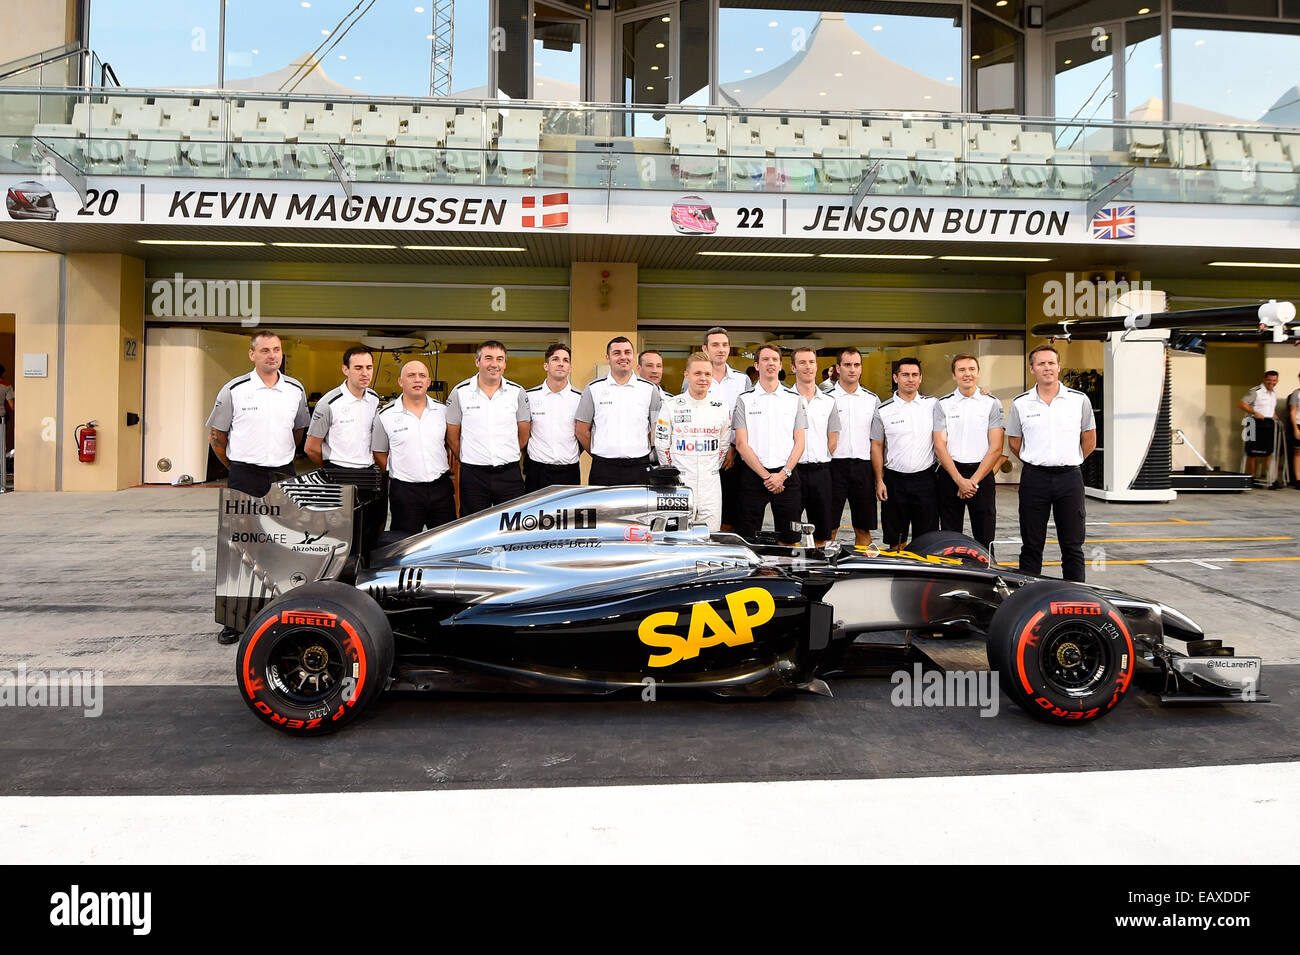 Page 2 - Teamfoto High Resolution Stock Photography and Images - Alamy